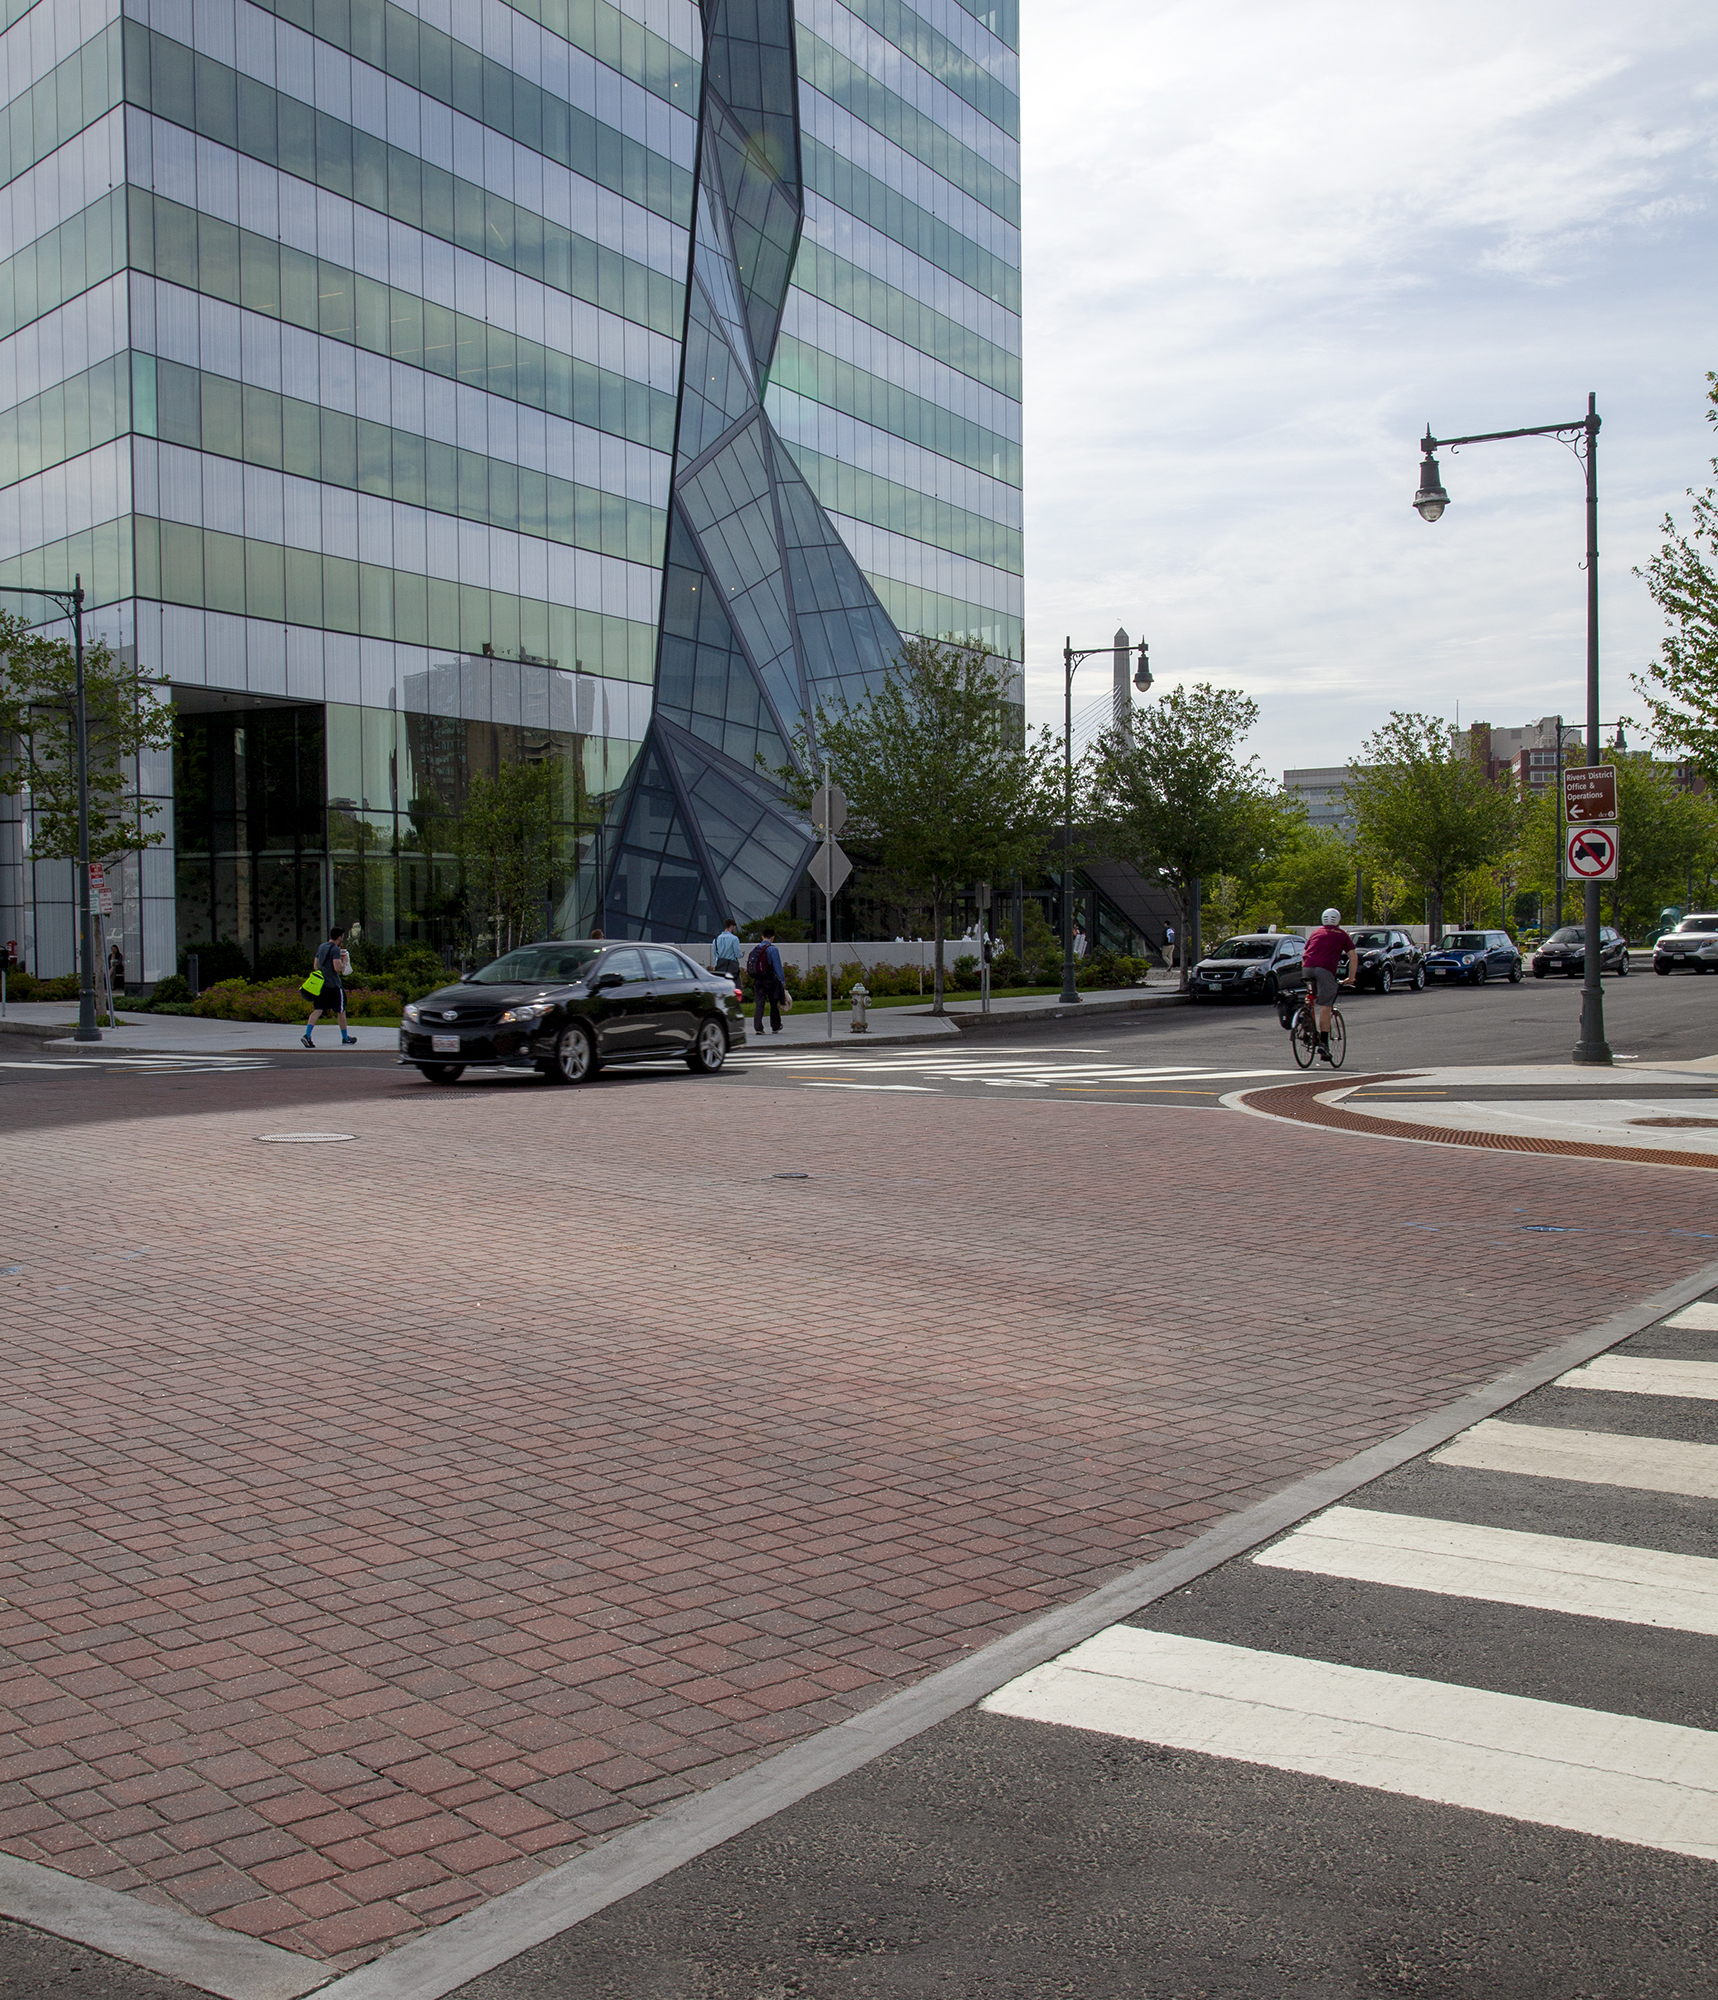 A vehicle, cyclist and pedestrian cross through the intersection, passing over a square paver bed of red Optiloc pavers.